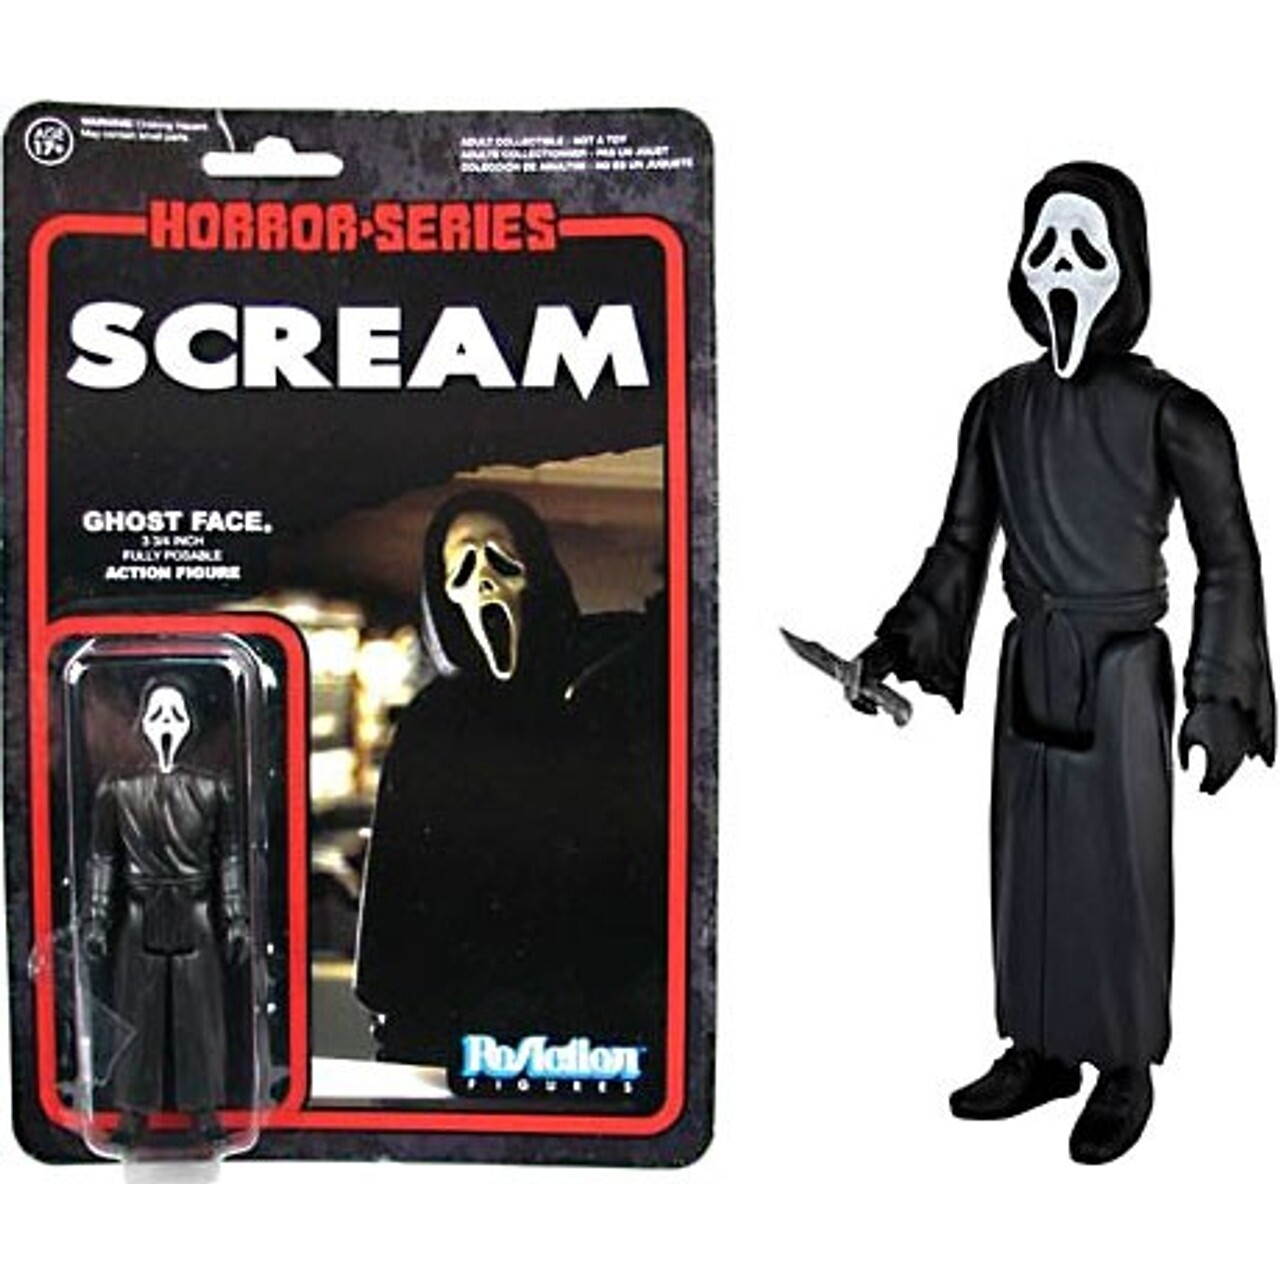 3 3/4"H Ghost Face from Scream ReAction Figure